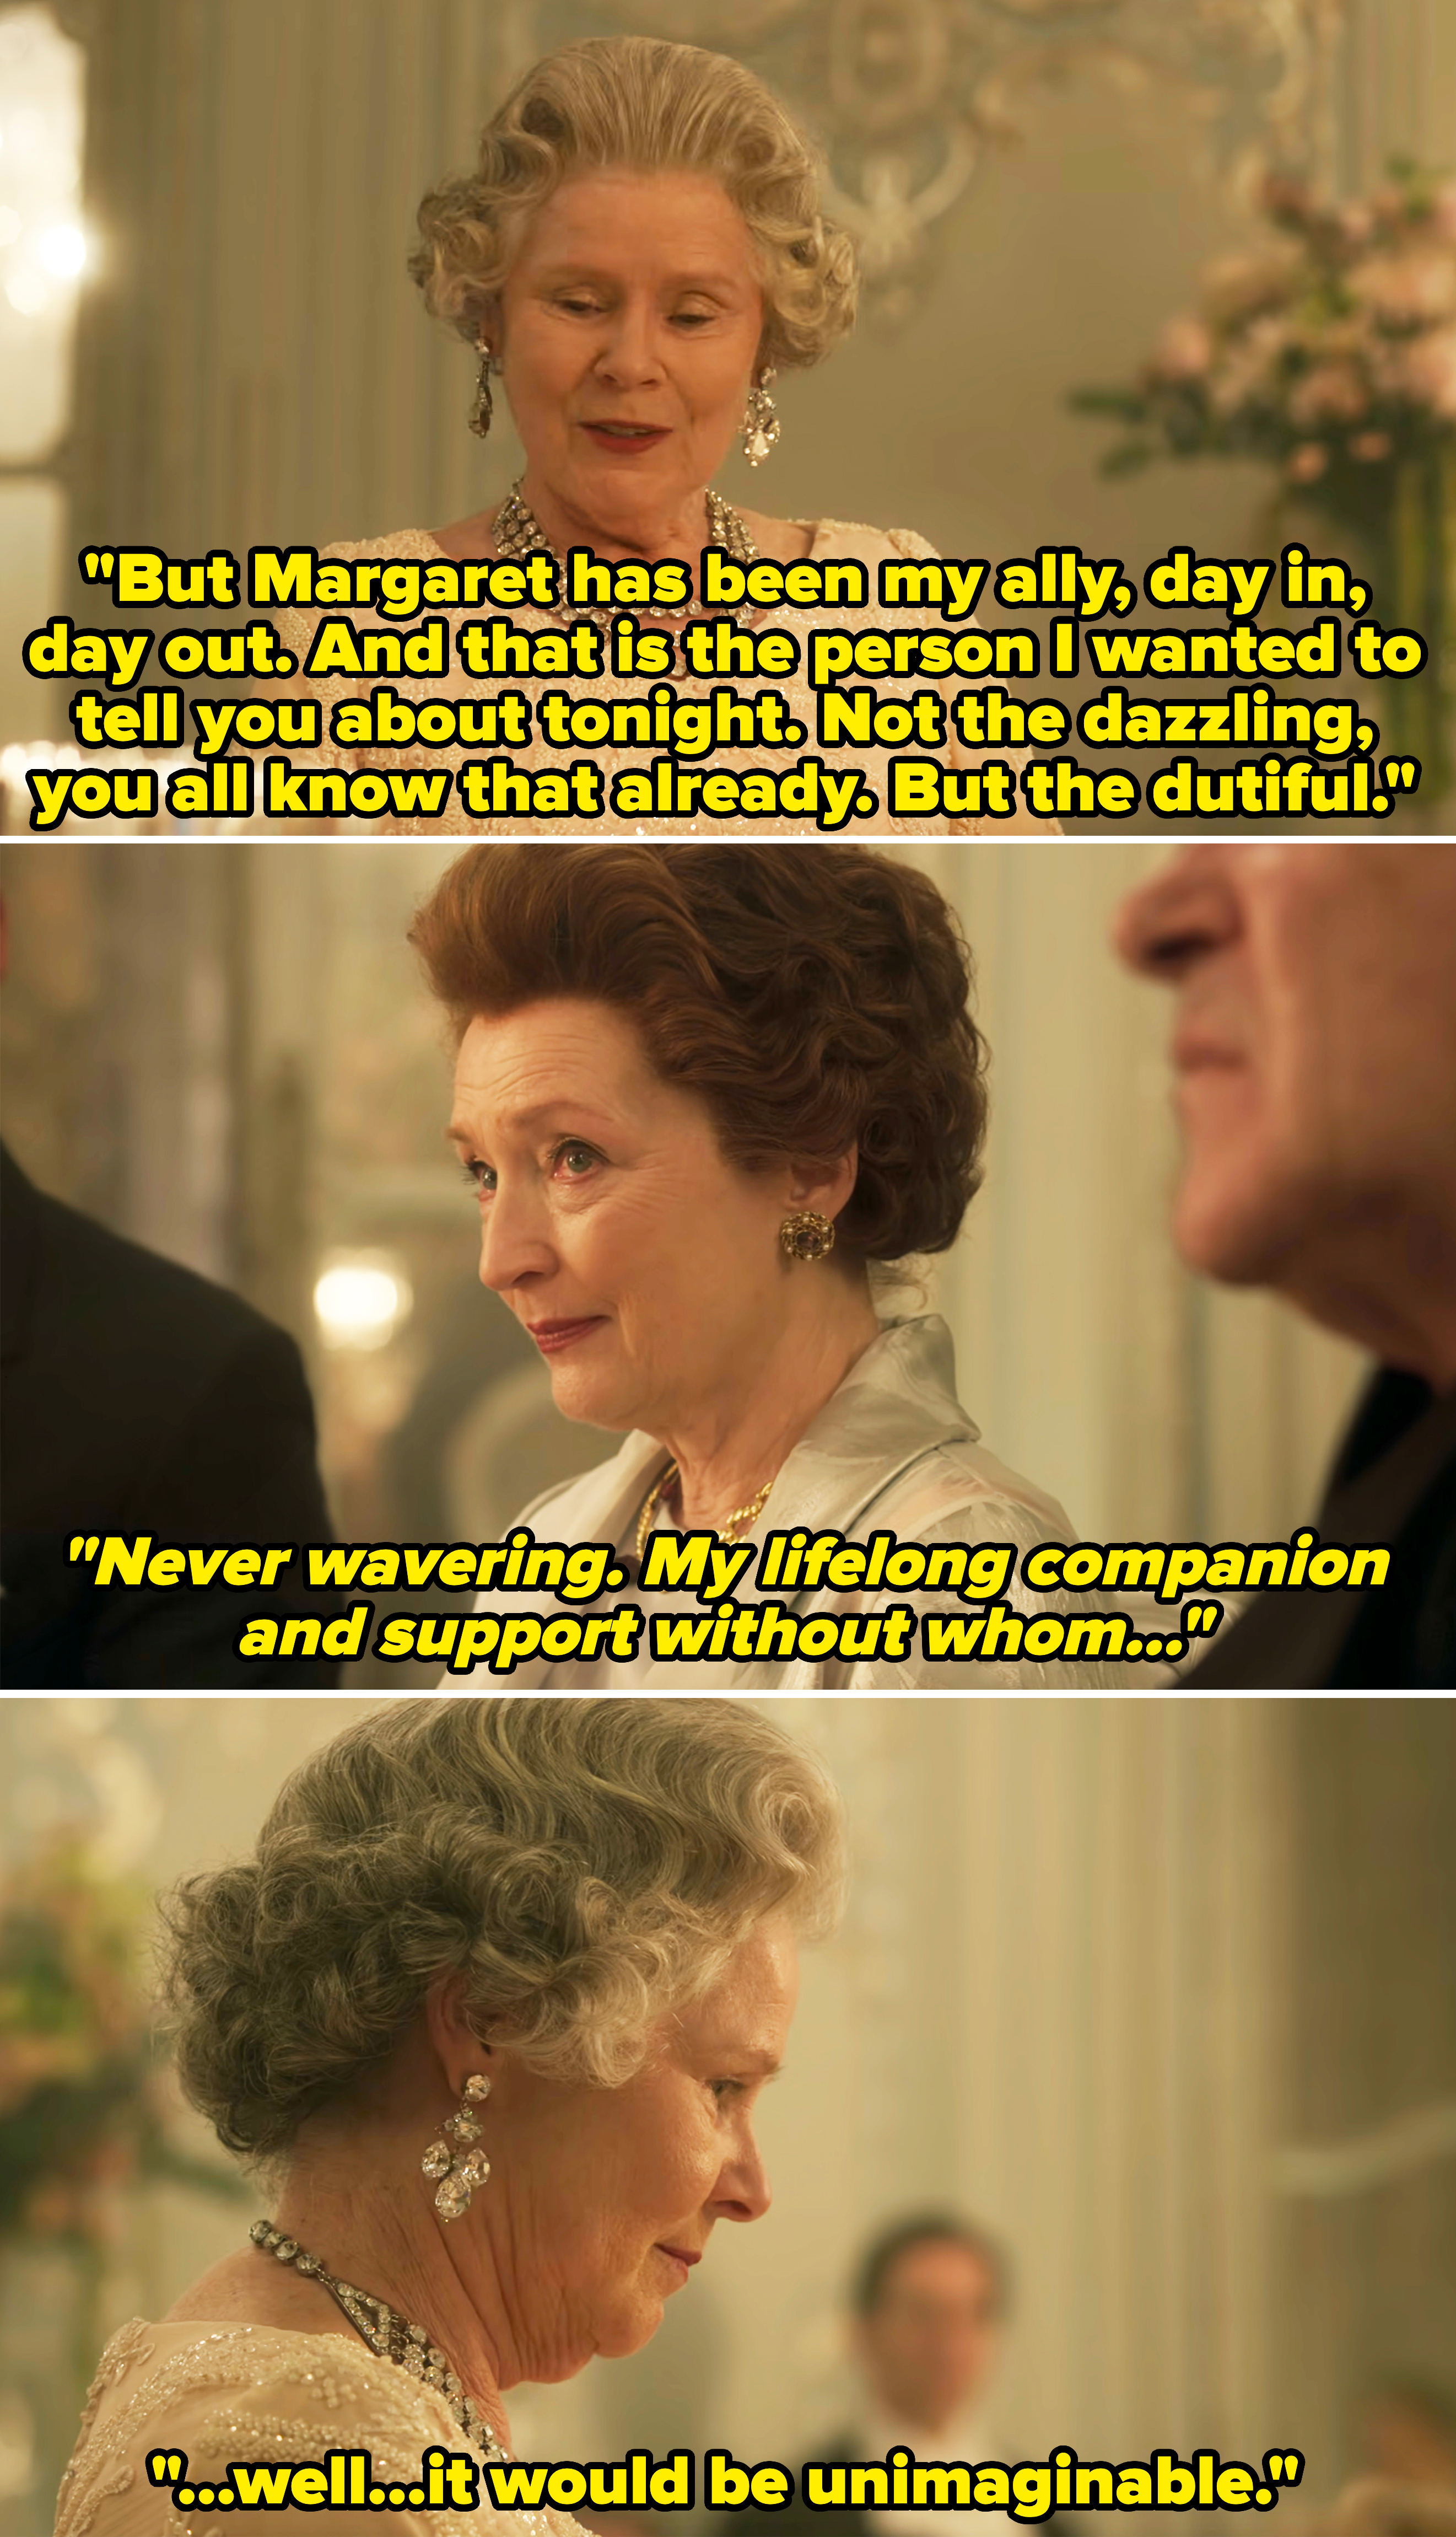 Queen Elizabeth at an intimate gathering in the show, saying her sister has been her ally, &quot;day in, day out&quot; — &quot;never wavering, my lifelong companion and support without whom, well, it would be imaginable&quot;